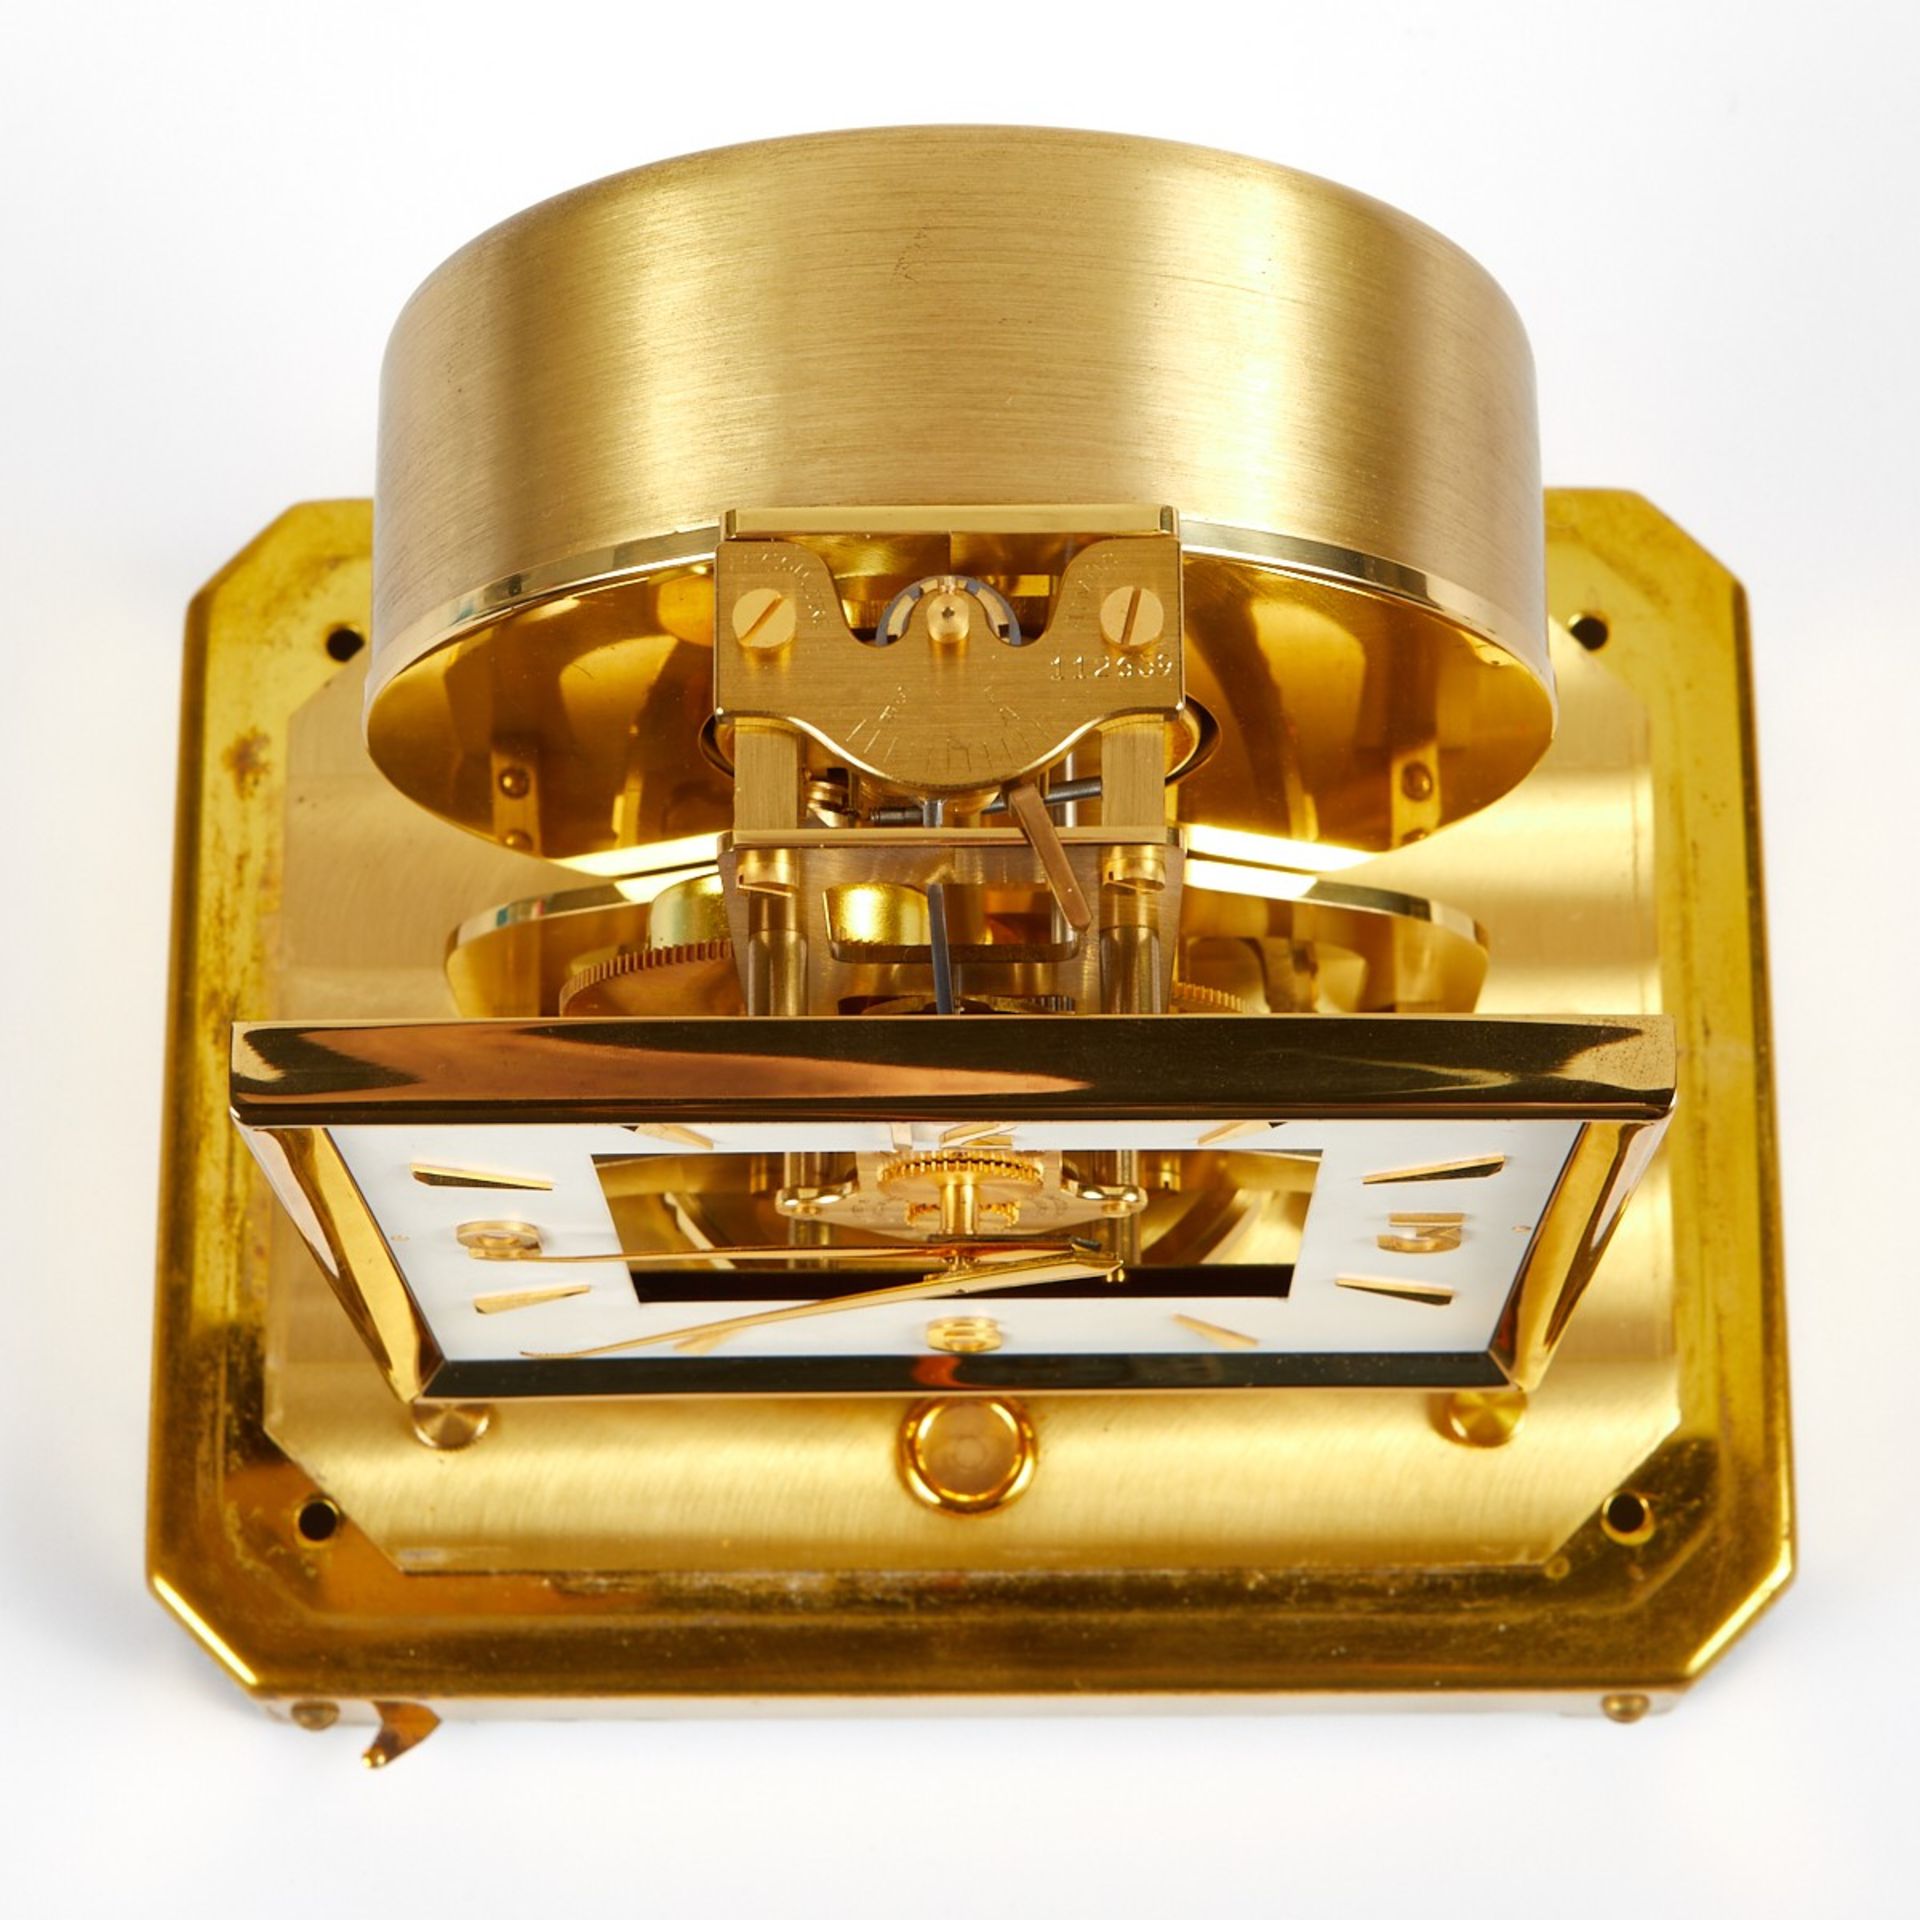 Jaeger LeCoultre Gold Atmos Table Clock - Image 6 of 7